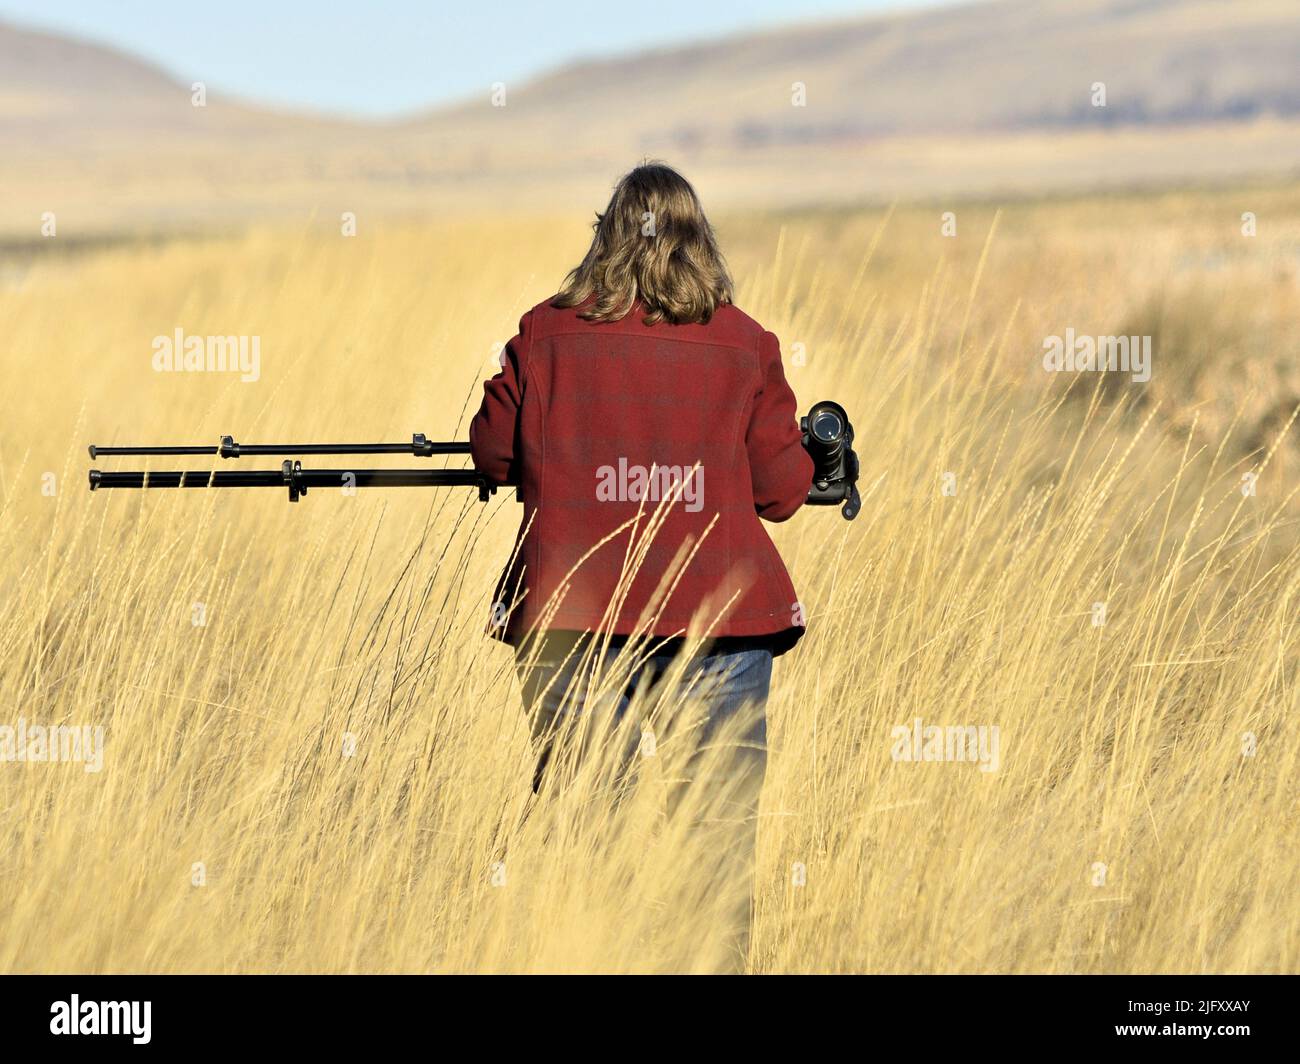 Photographer carries equipment througoh an open field to take a landscape picture. Stock Photo